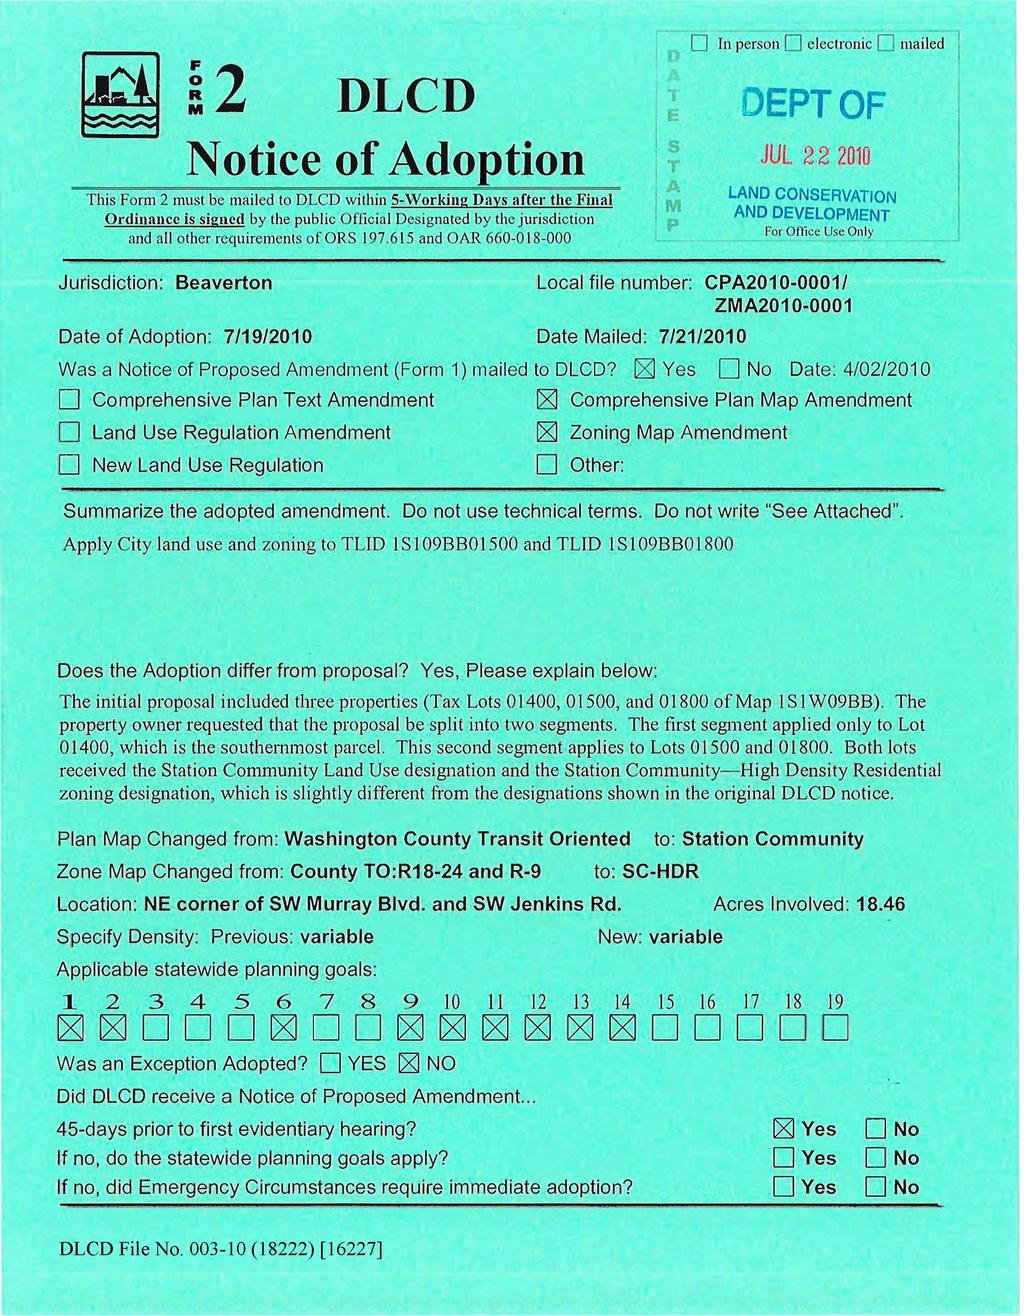 ! I In person Q DLCD Notice of Adoption electronic Q mailed DEPT OF JUL 22 2010 LAND CONSERVATION A N D DEVELOPMENT T h i s F o r m 2 must be mailed to D L C D within 5 - W o r k i n g D a y s after